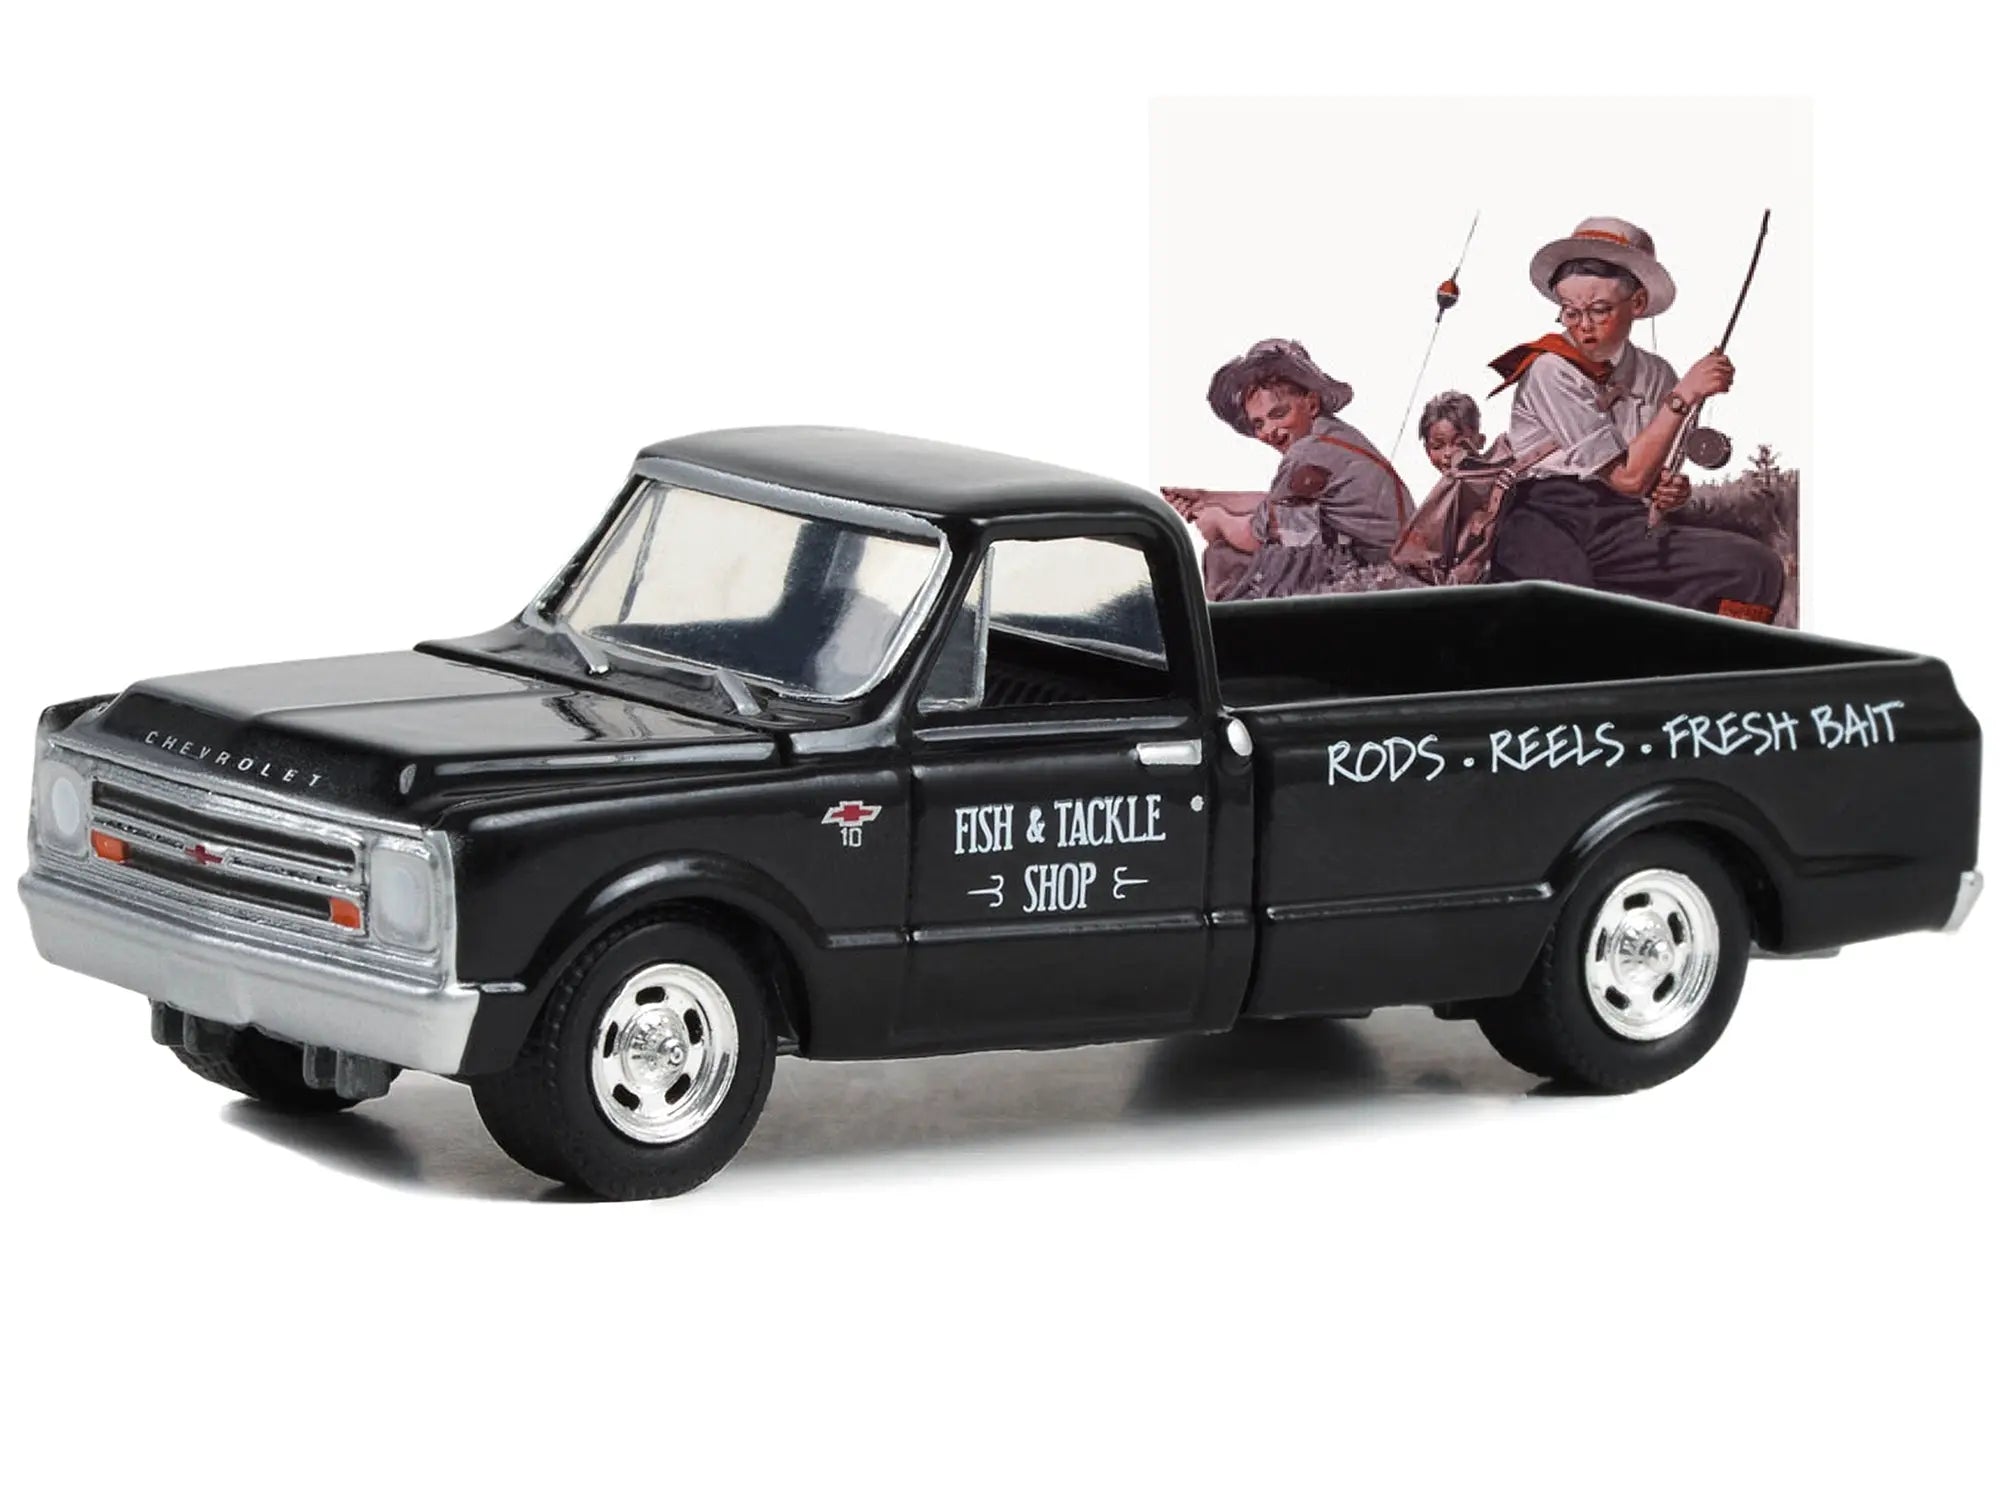 1968 Chevrolet C-10 Pickup Truck Black "Fish & Tackle Shop" "Norman Rockwell" Series 5 1/64 Diecast Model Car by Greenlight Greenlight